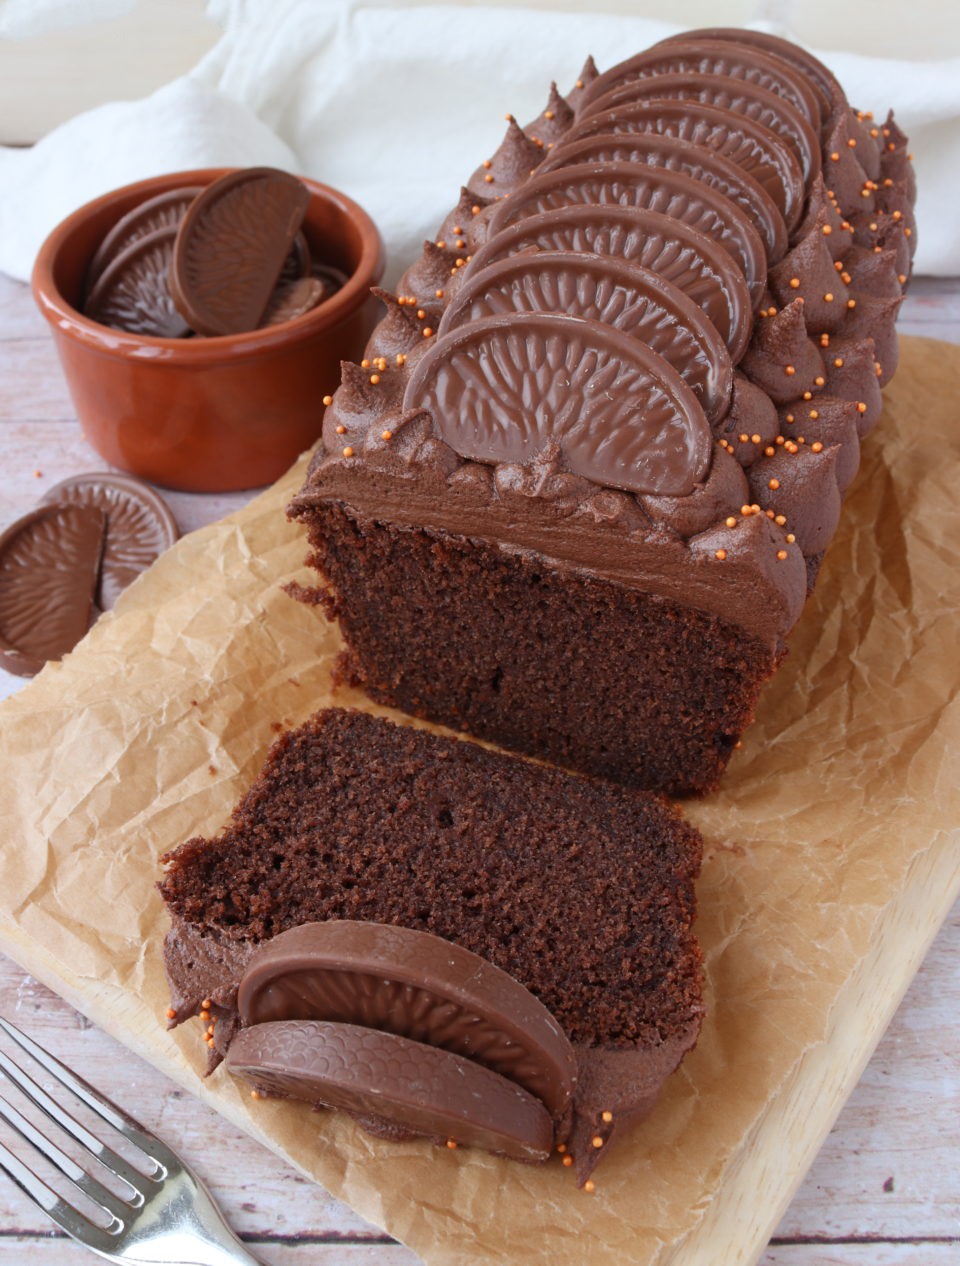 Chocolate Orange Loaf Cake - Delicious Chocolate Orange Loaf Cake decorated with chocolate orange buttercream and Terry's Chocolate Orange pieces - easy to follow recipe!